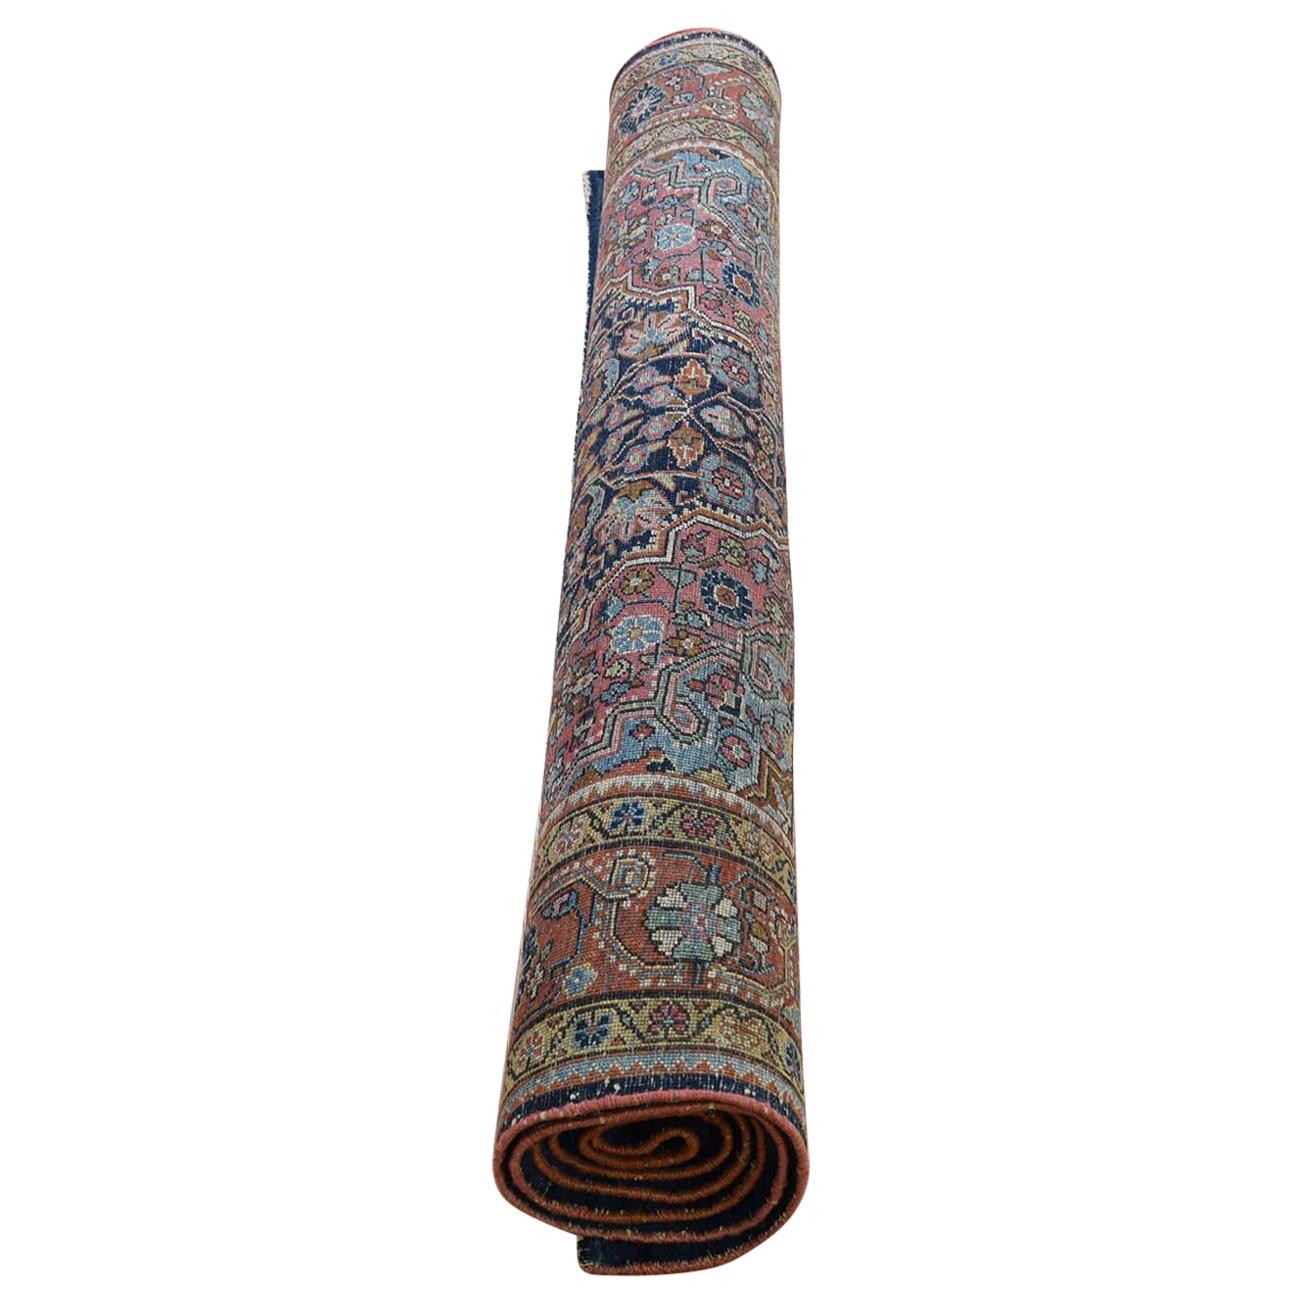 This is a genuine hand knotted Persian rug. Our entire inventory is made of either hand knotted or handwoven rugs.

Enhance your room style with this marvelous handmade carpet. This handcrafted gallery size antique, is an authentic Persian Josan